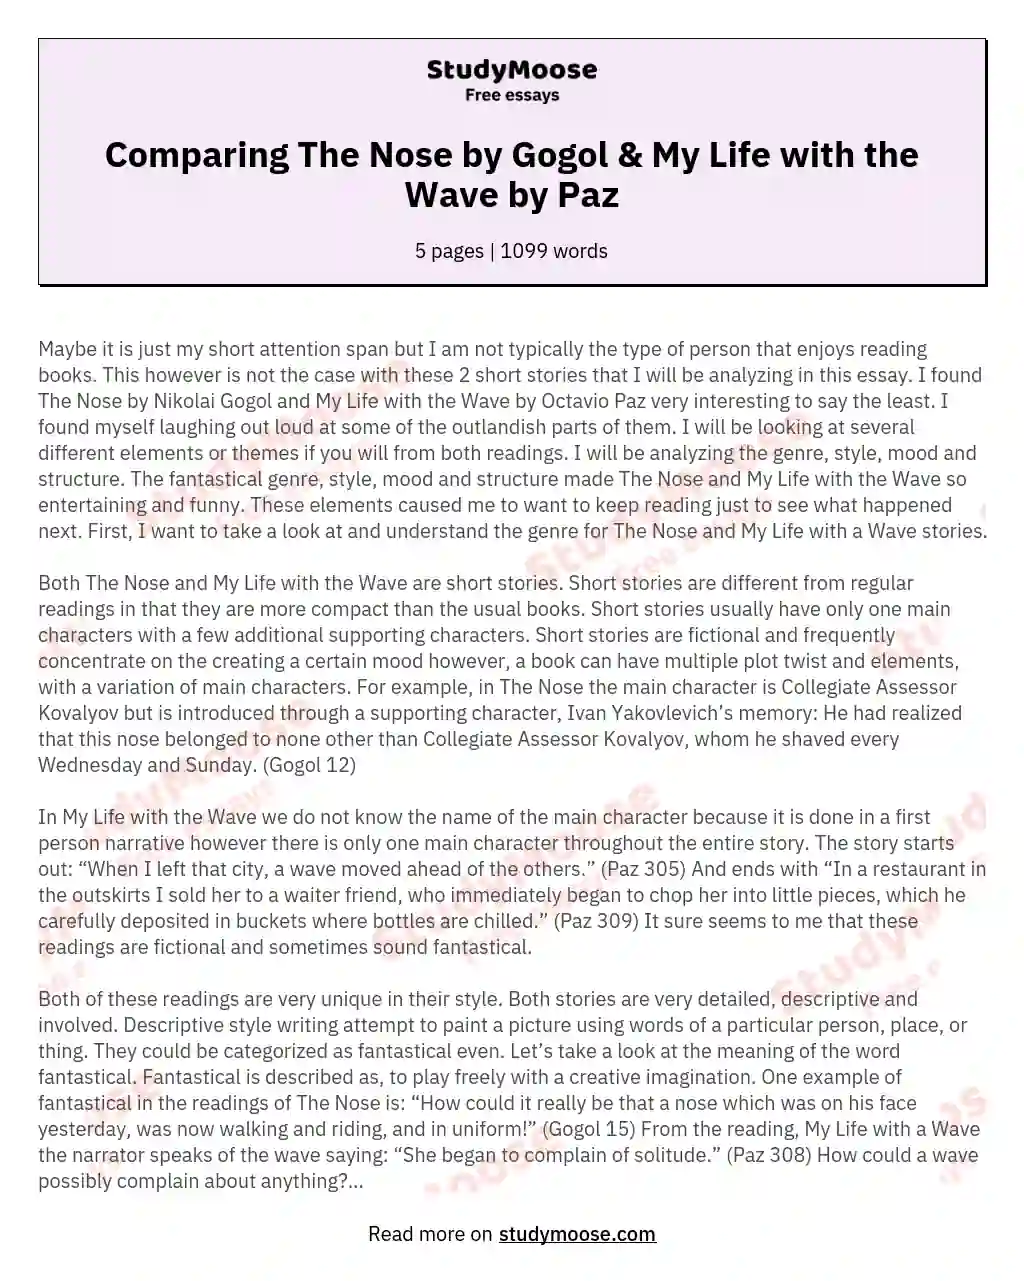 Comparing The Nose by Gogol & My Life with the Wave by Paz essay